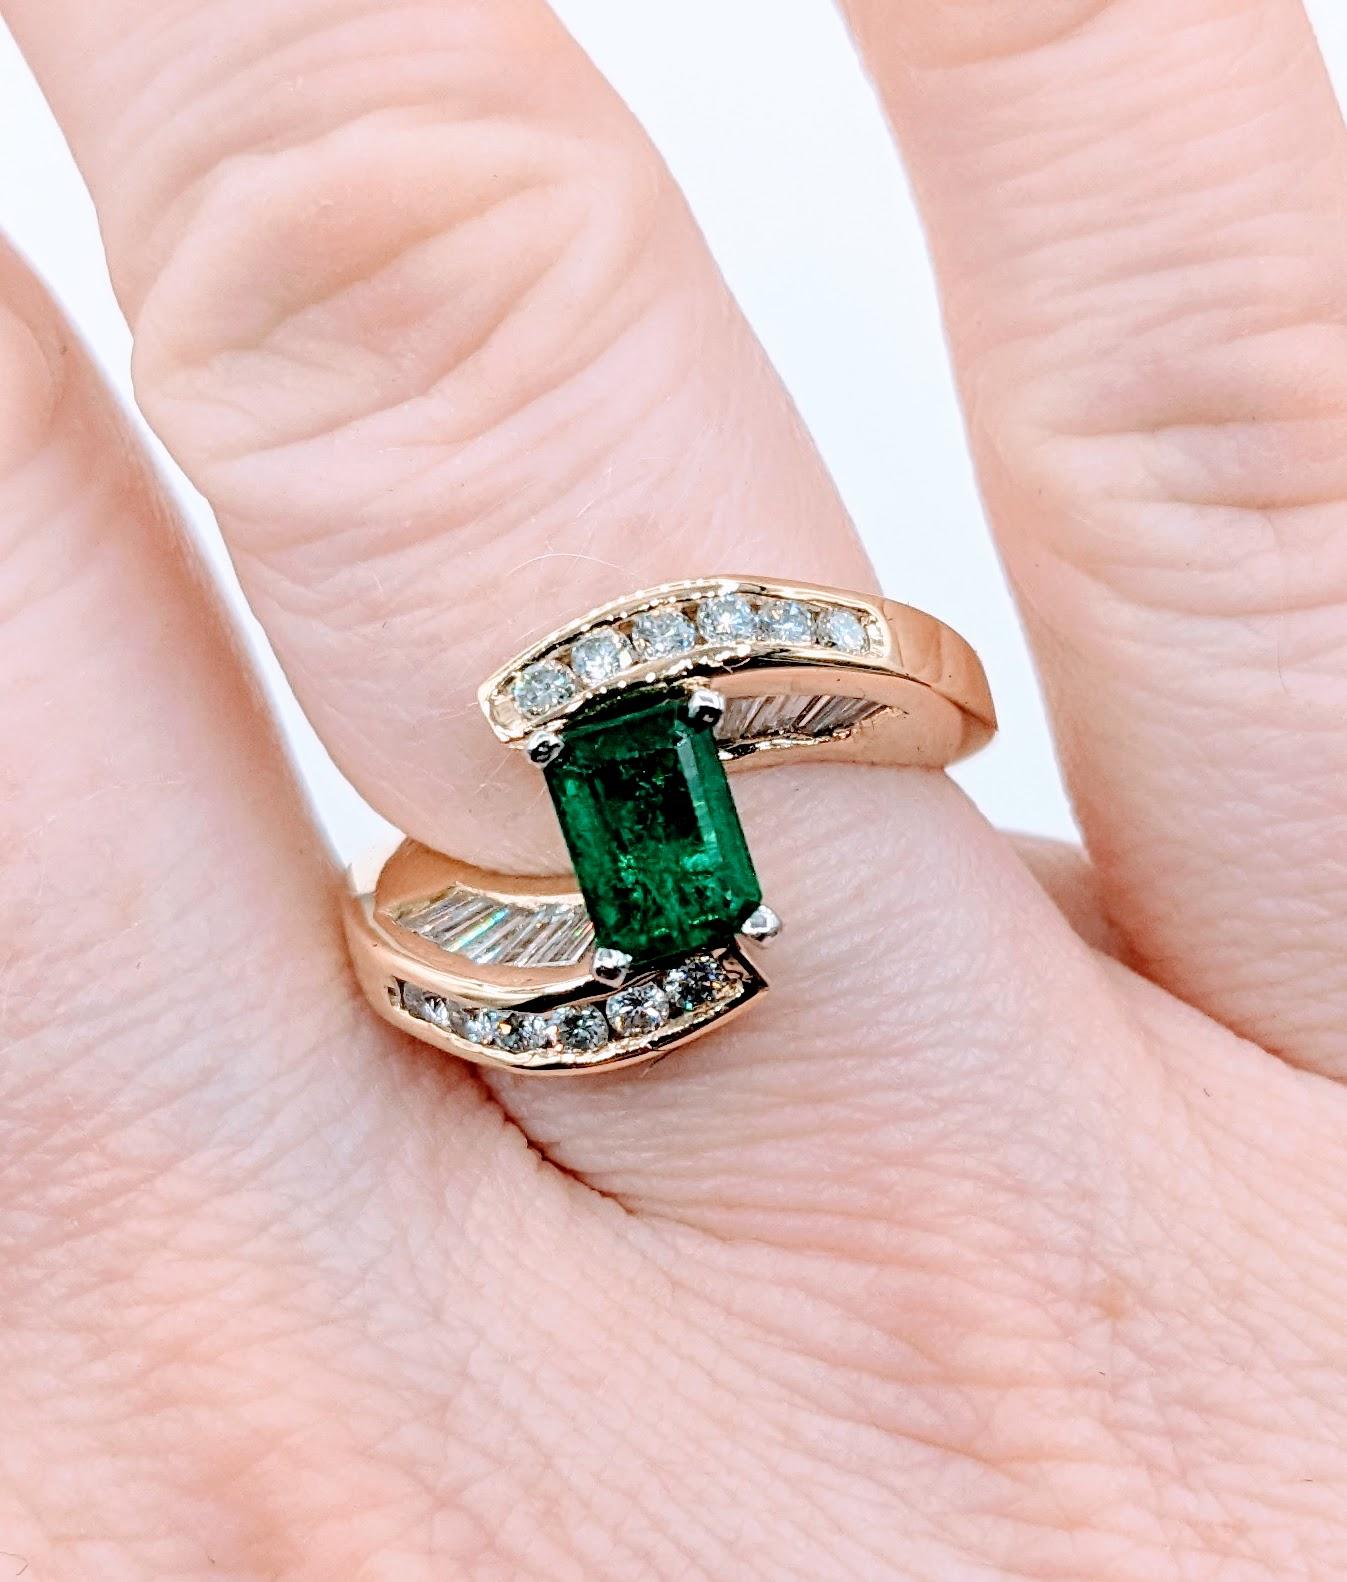 Superb 18k Emerald and Diamond Bypass Ring

Indulge in the luxurious beauty of this exquisite ring, crafted from 18k yellow gold and featuring 1.50ctw of dazzling round and baguette diamonds. The sparkling diamonds boast VS2 clarity and G color,